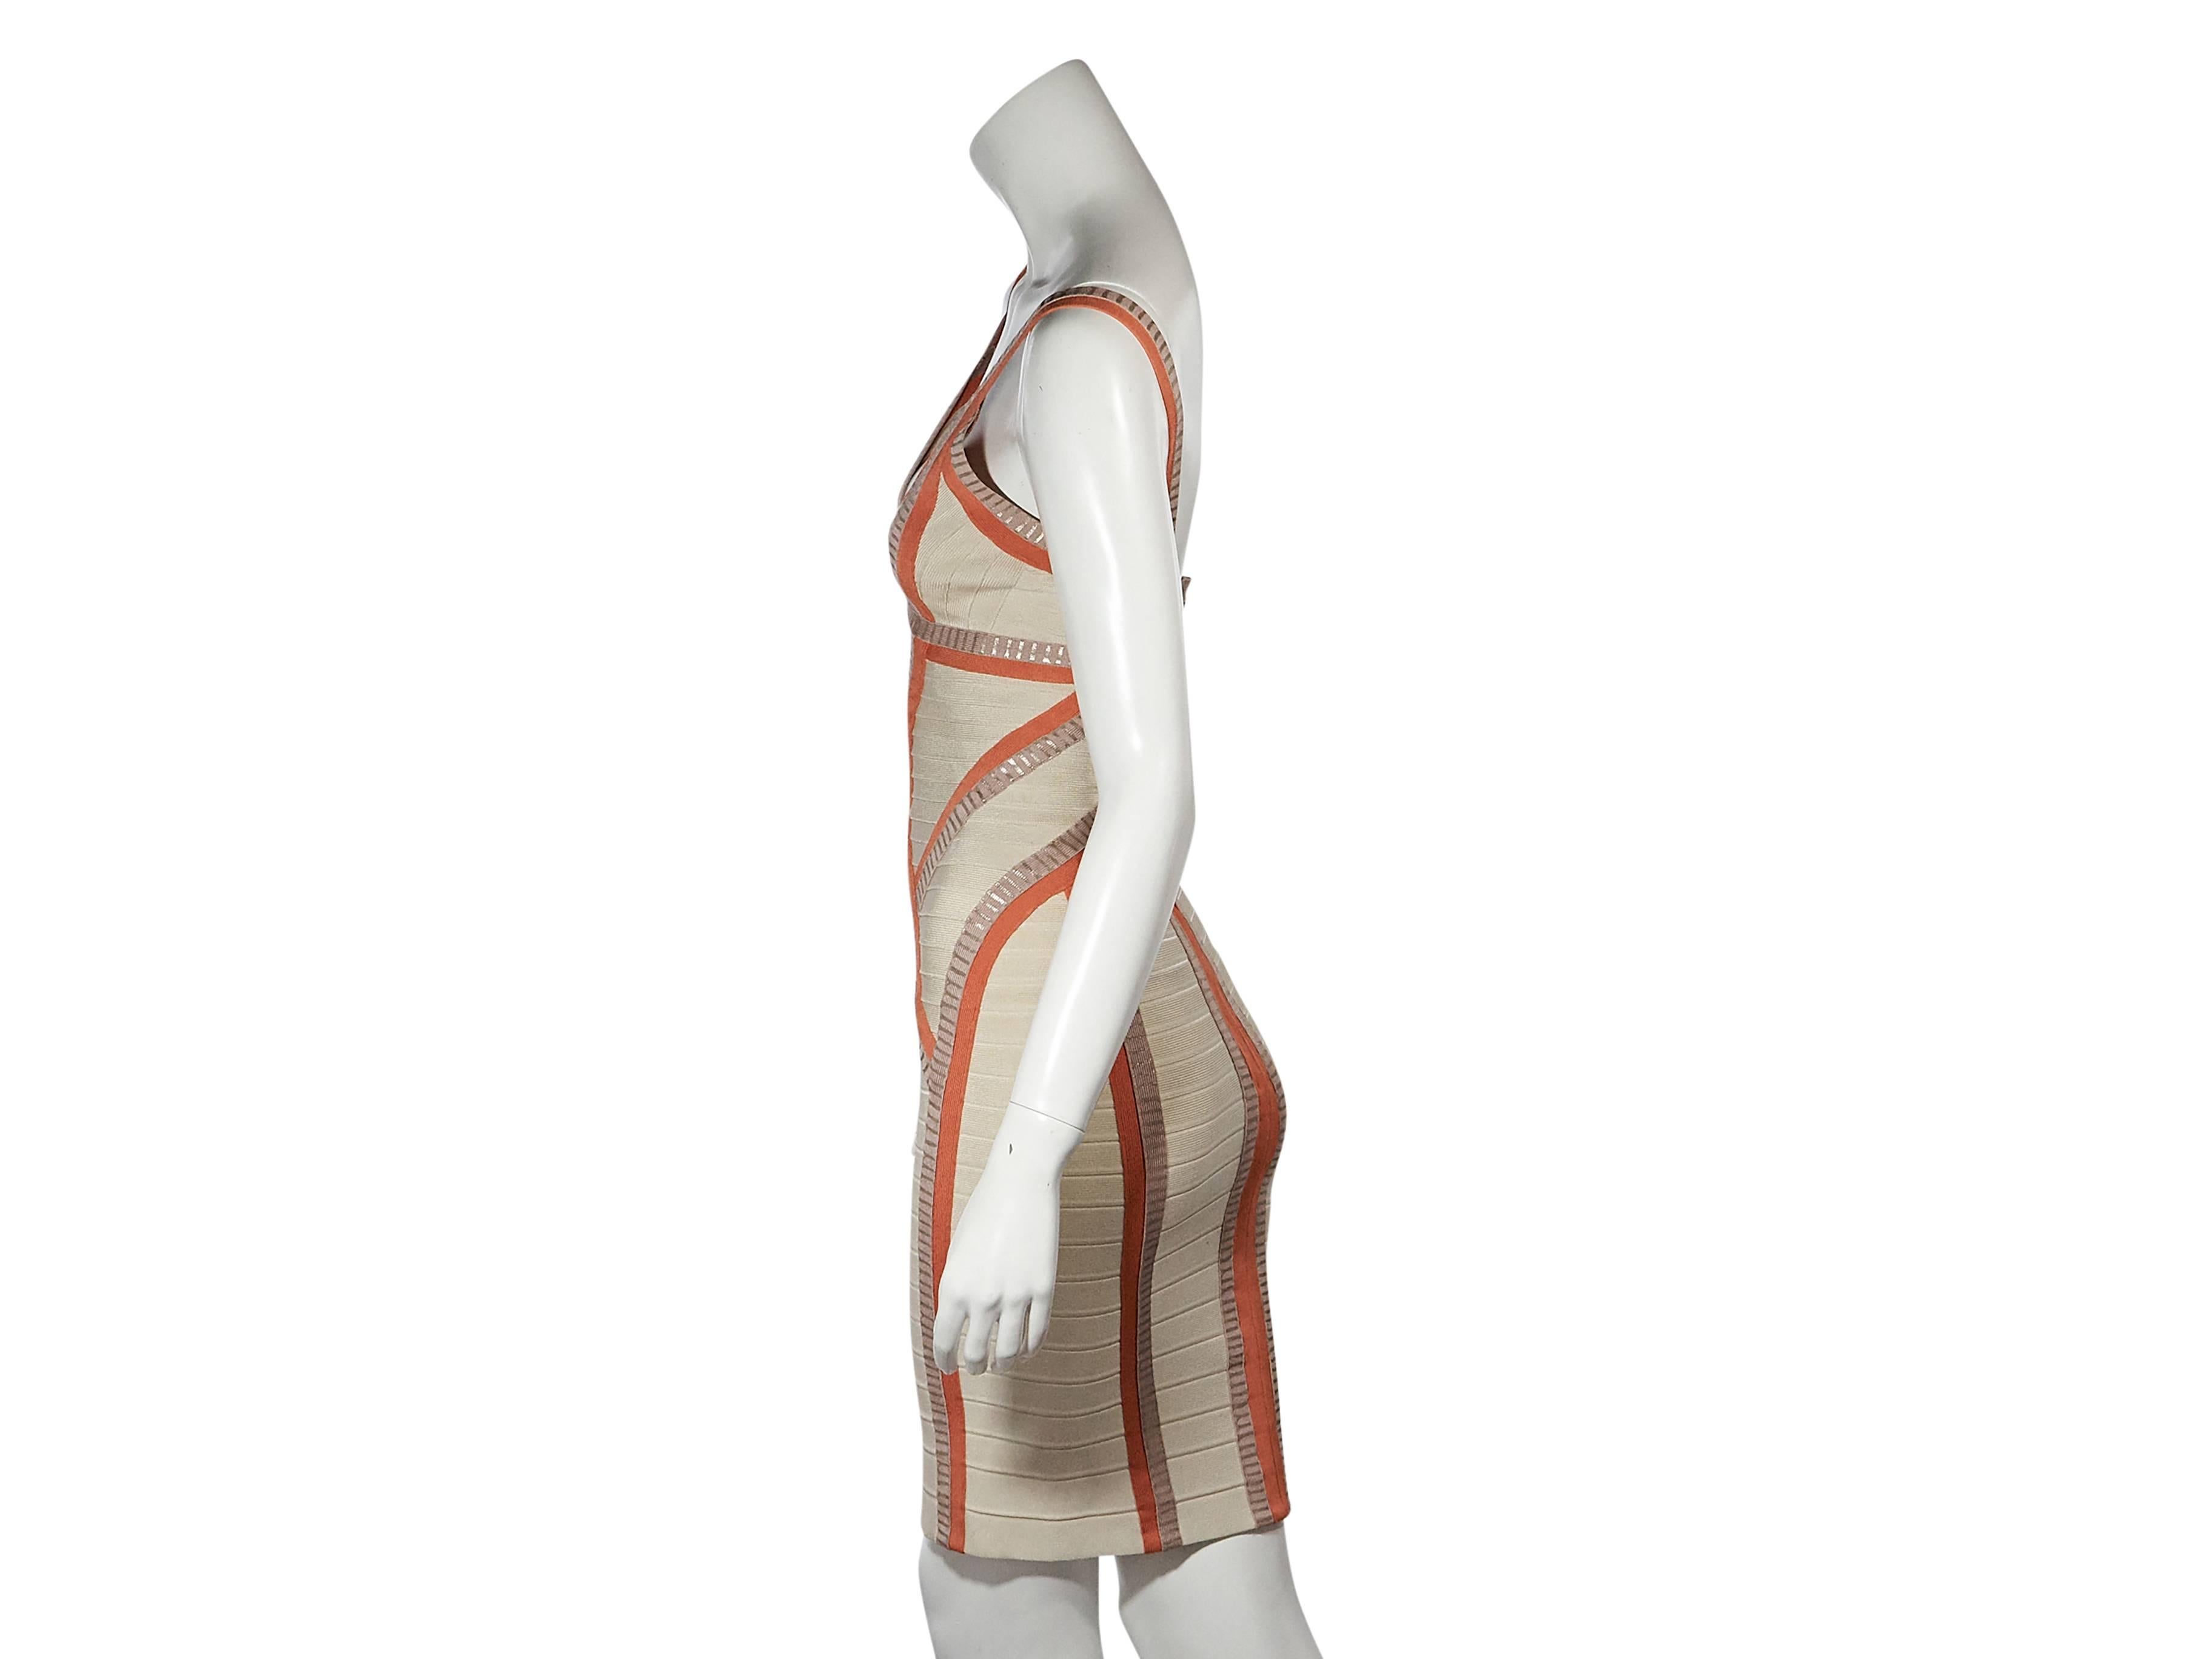 Product details: Tan and orange bandage dress by Herve Leger. Formfitting silhouette. Deep v-neck. Sleeveless. Concealed back zip closure. 
Condition: Very good. 
Est. Retail $ 1,350.00

